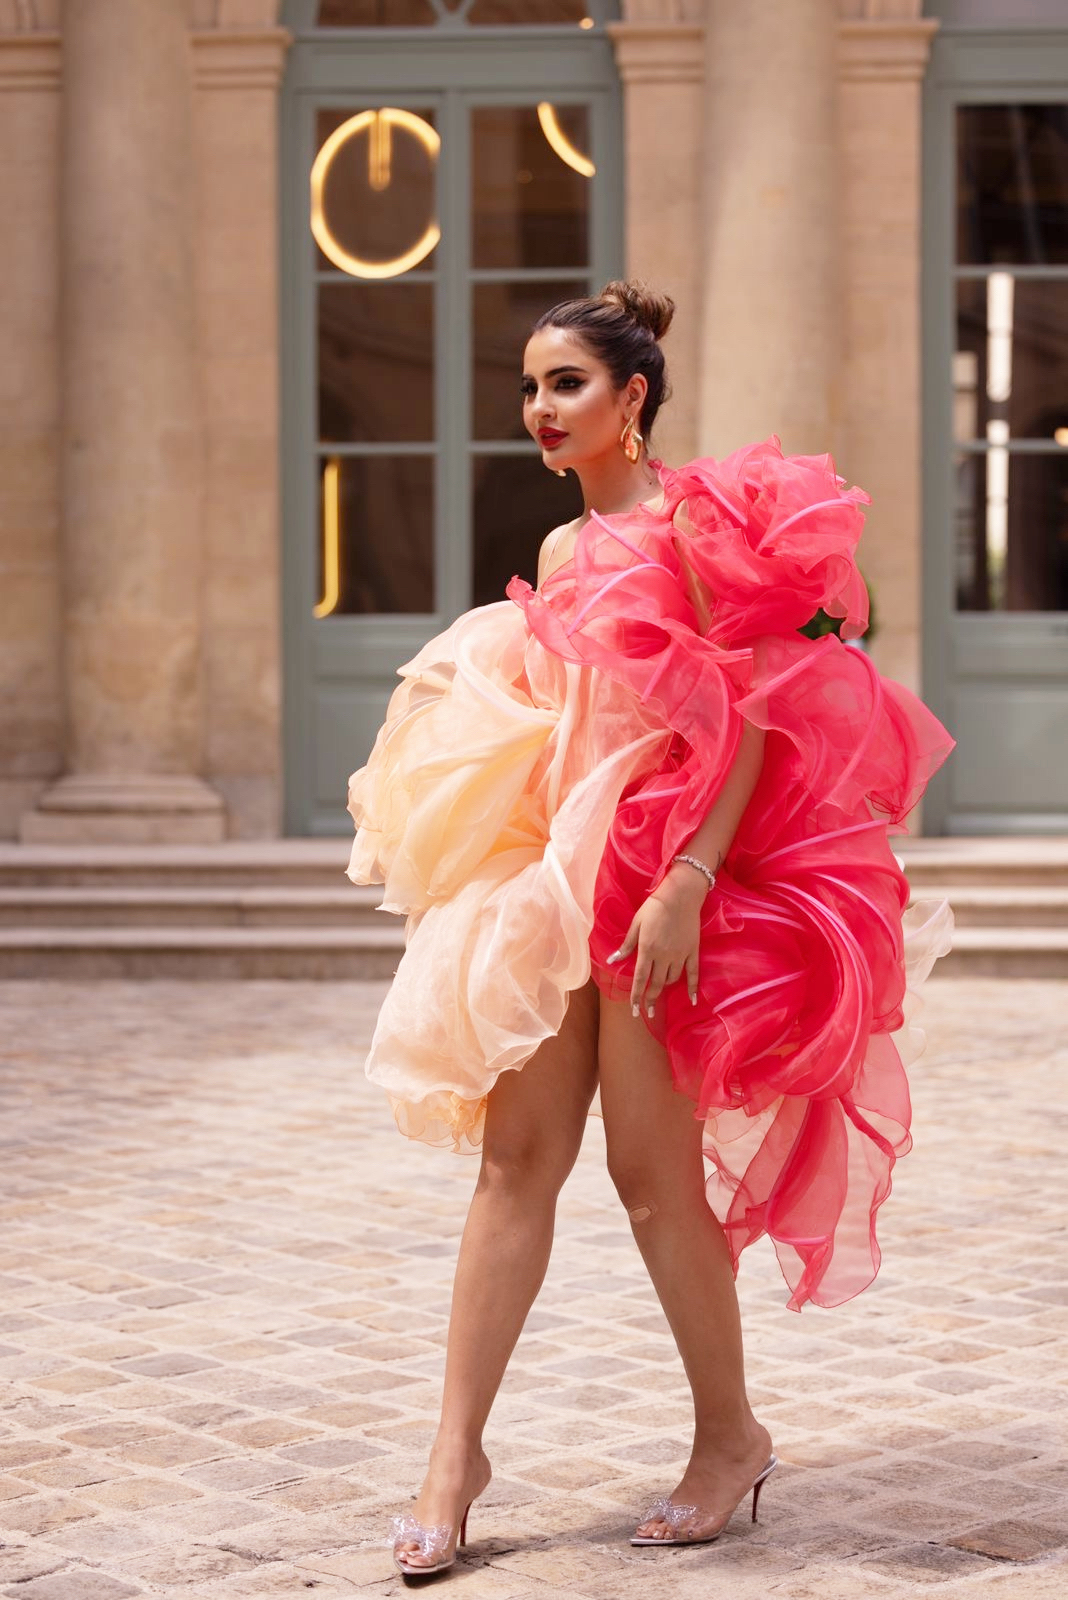 Image for Bollywood Star Deepti Sadhwani Shines At Paris Haute Couture Week With Stunning Haute Couture Looks